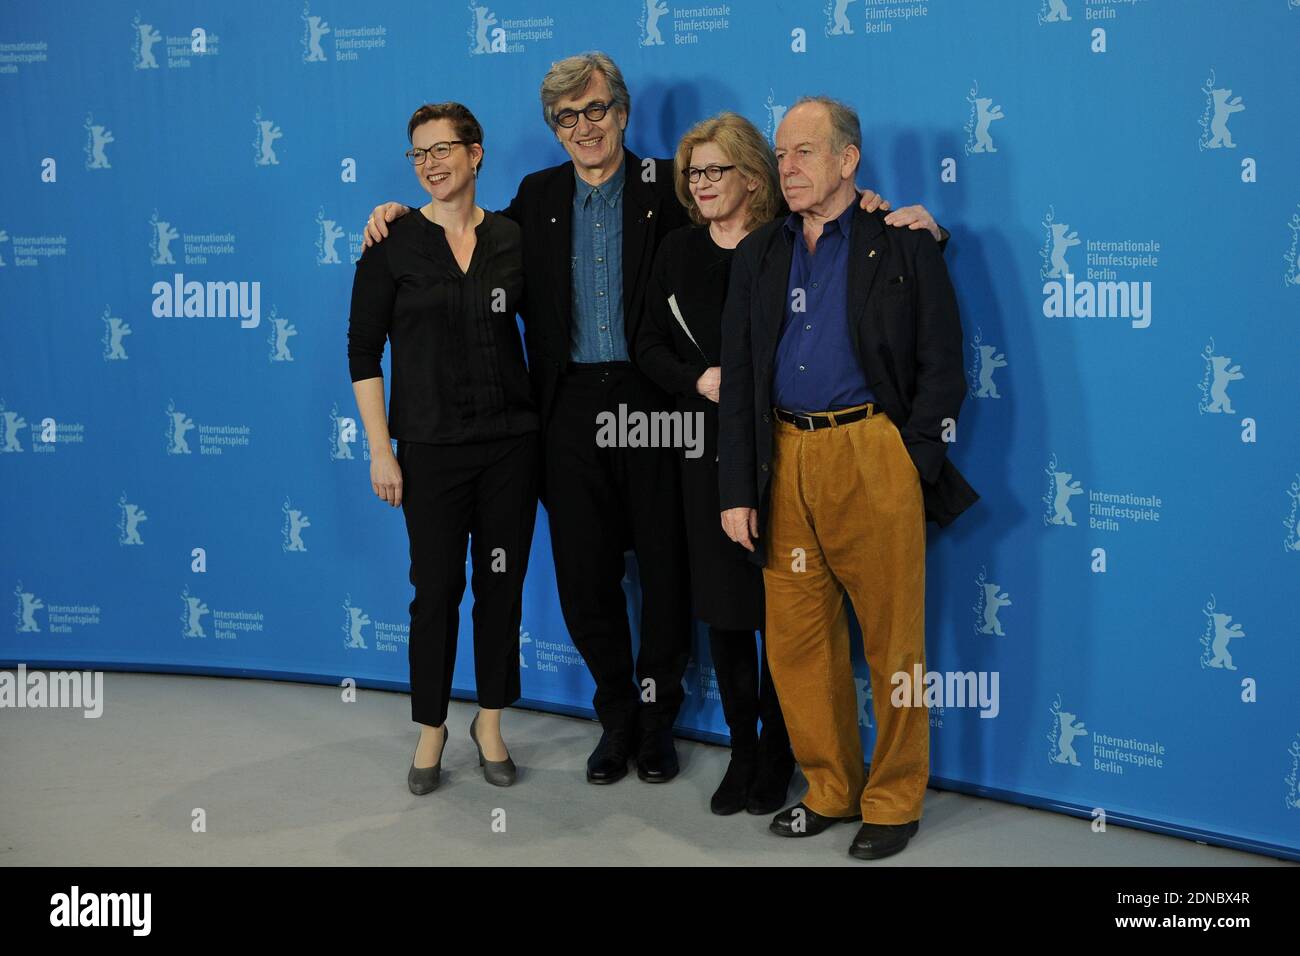 Yella Rottlaender, Director Wim Wenders, Lisa Kreuzer and Ruediger Vogler attending the 'Honorary Golden Bear For Wim Wenders' Photocall during the 65th Berlinale, Berlin International Film Festival, in Berlin, Germany on February 12, 2015. Photo by Aurore Marechal/ABACAPRESS.COM Stock Photo